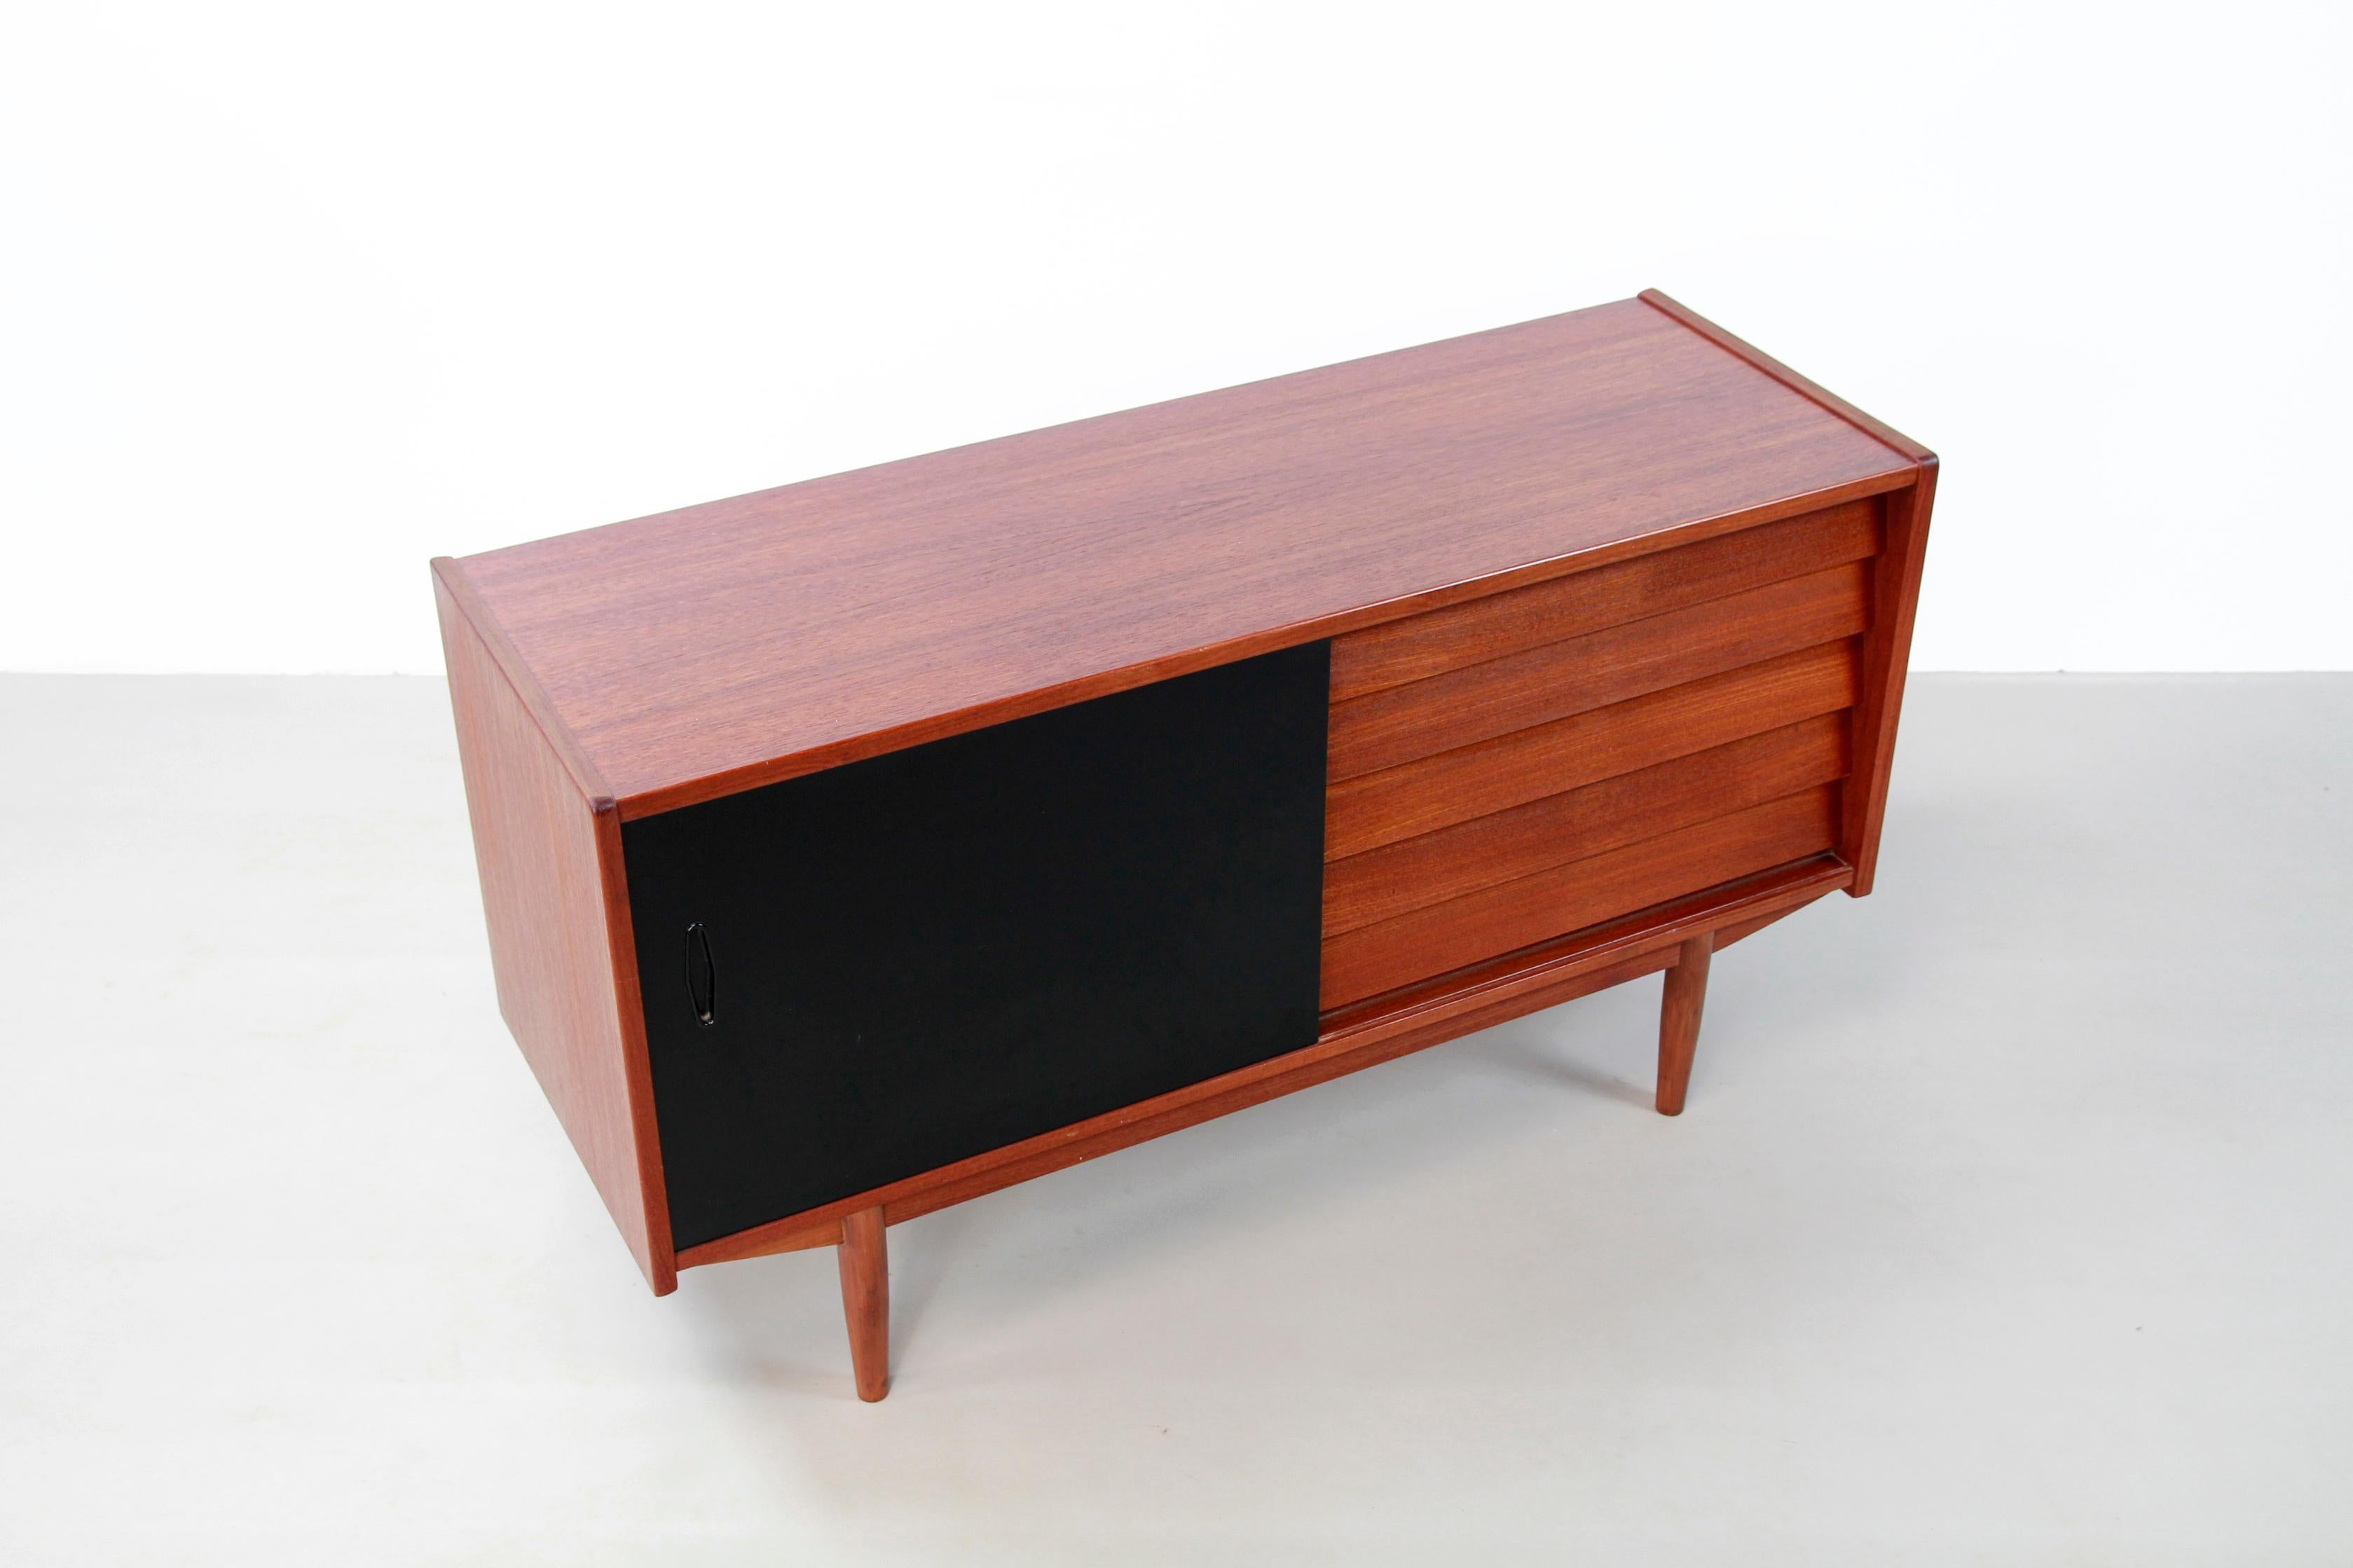 Swedish design sideboard designed by Nils Jonsson and produced by Hugo Troeds, Bjarnum. This minimalist sideboard with beautiful design comes from Sweden from the 1960s. The sideboard has an original black lacquered sliding door and five drawers.